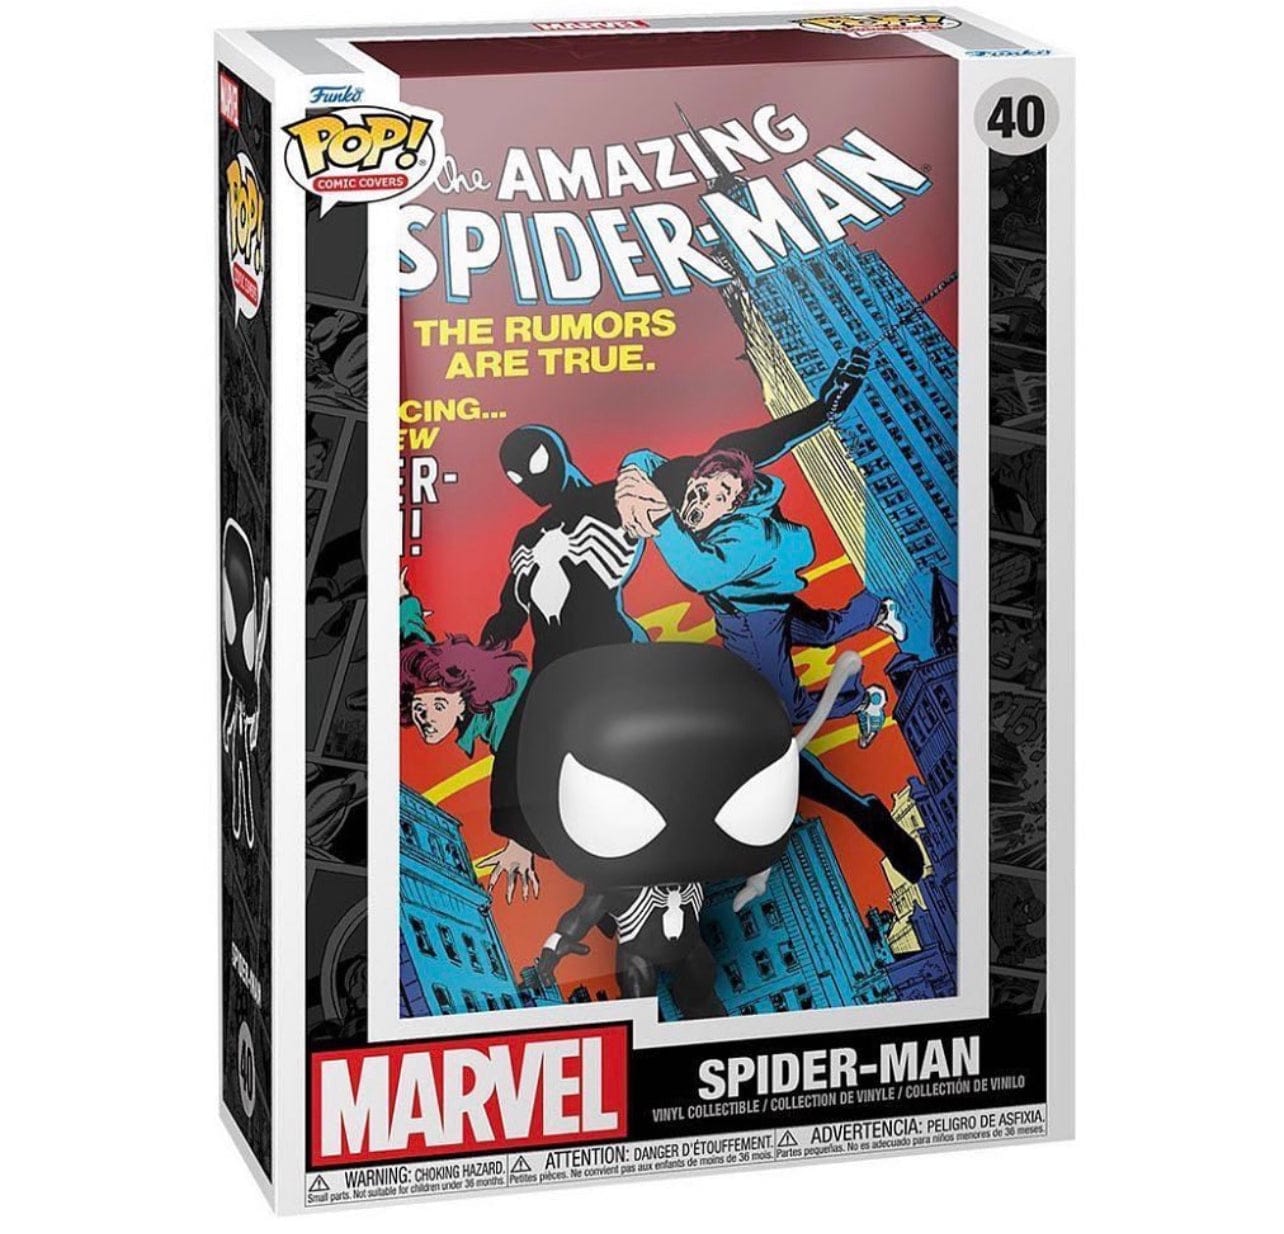 Amazing Spider-Man #252 Funko Pop! Comic Cover Figure #40 with Case Media 1 of 6